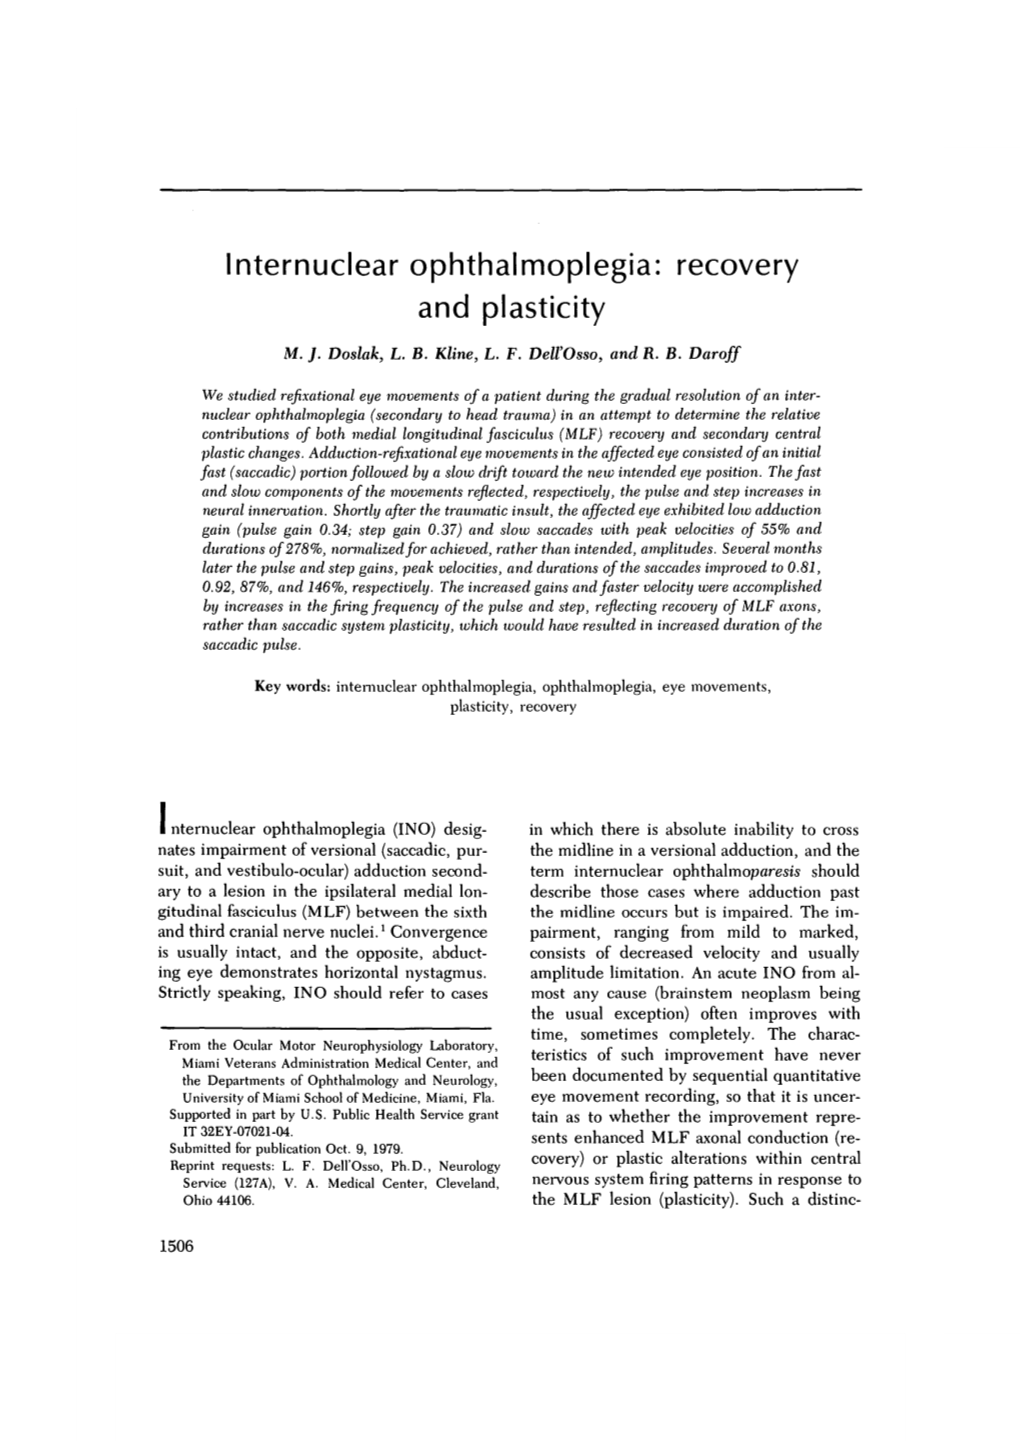 Internuclear Ophthalmoplegia: Recovery and Plasticity